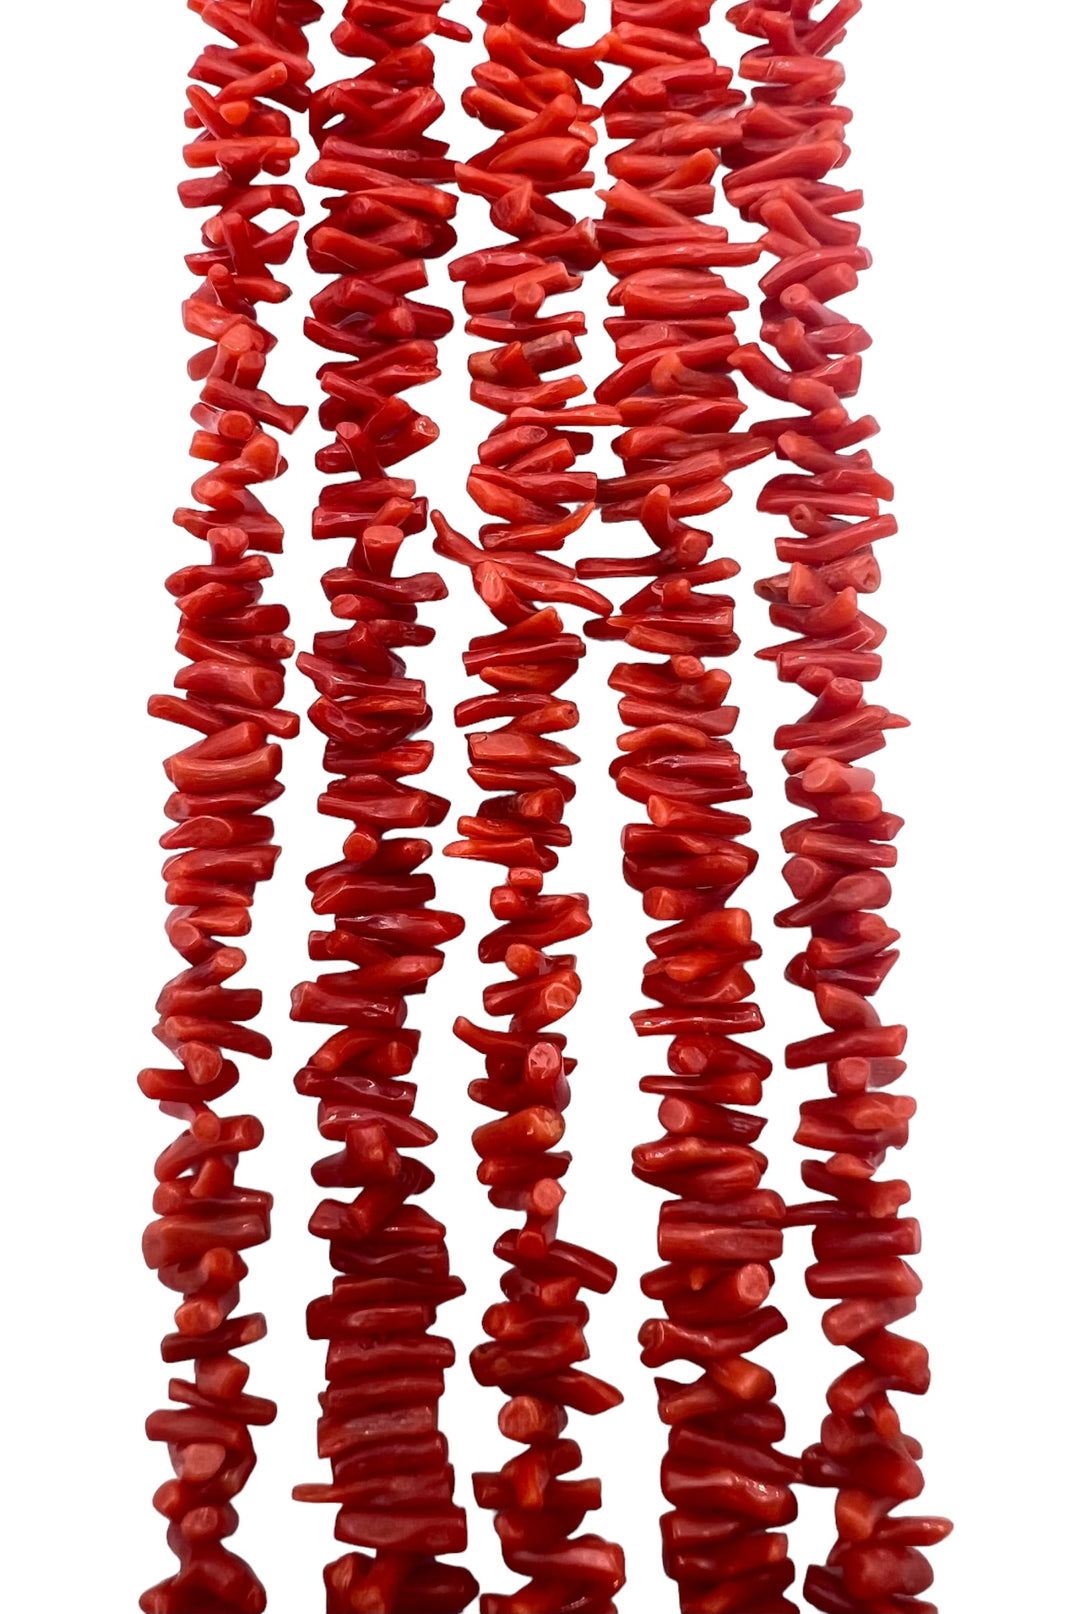 100% Natural High Quality Red Italian Sea Coral Small